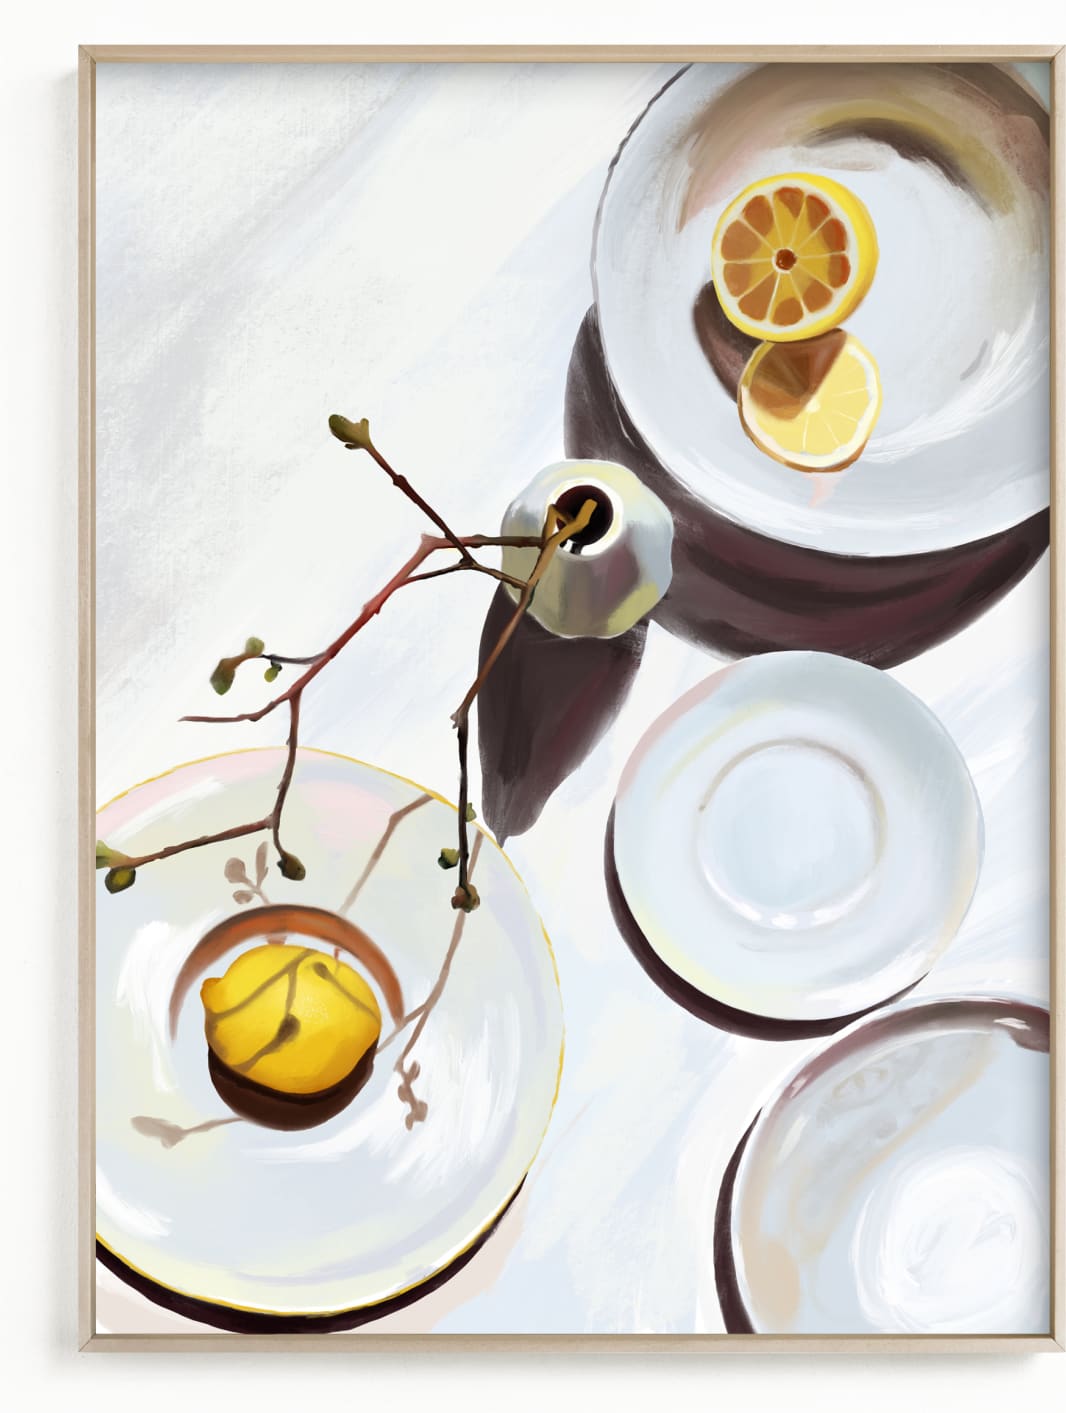 This is a white art by Kinga Subject called Flatlay Lemon Study.